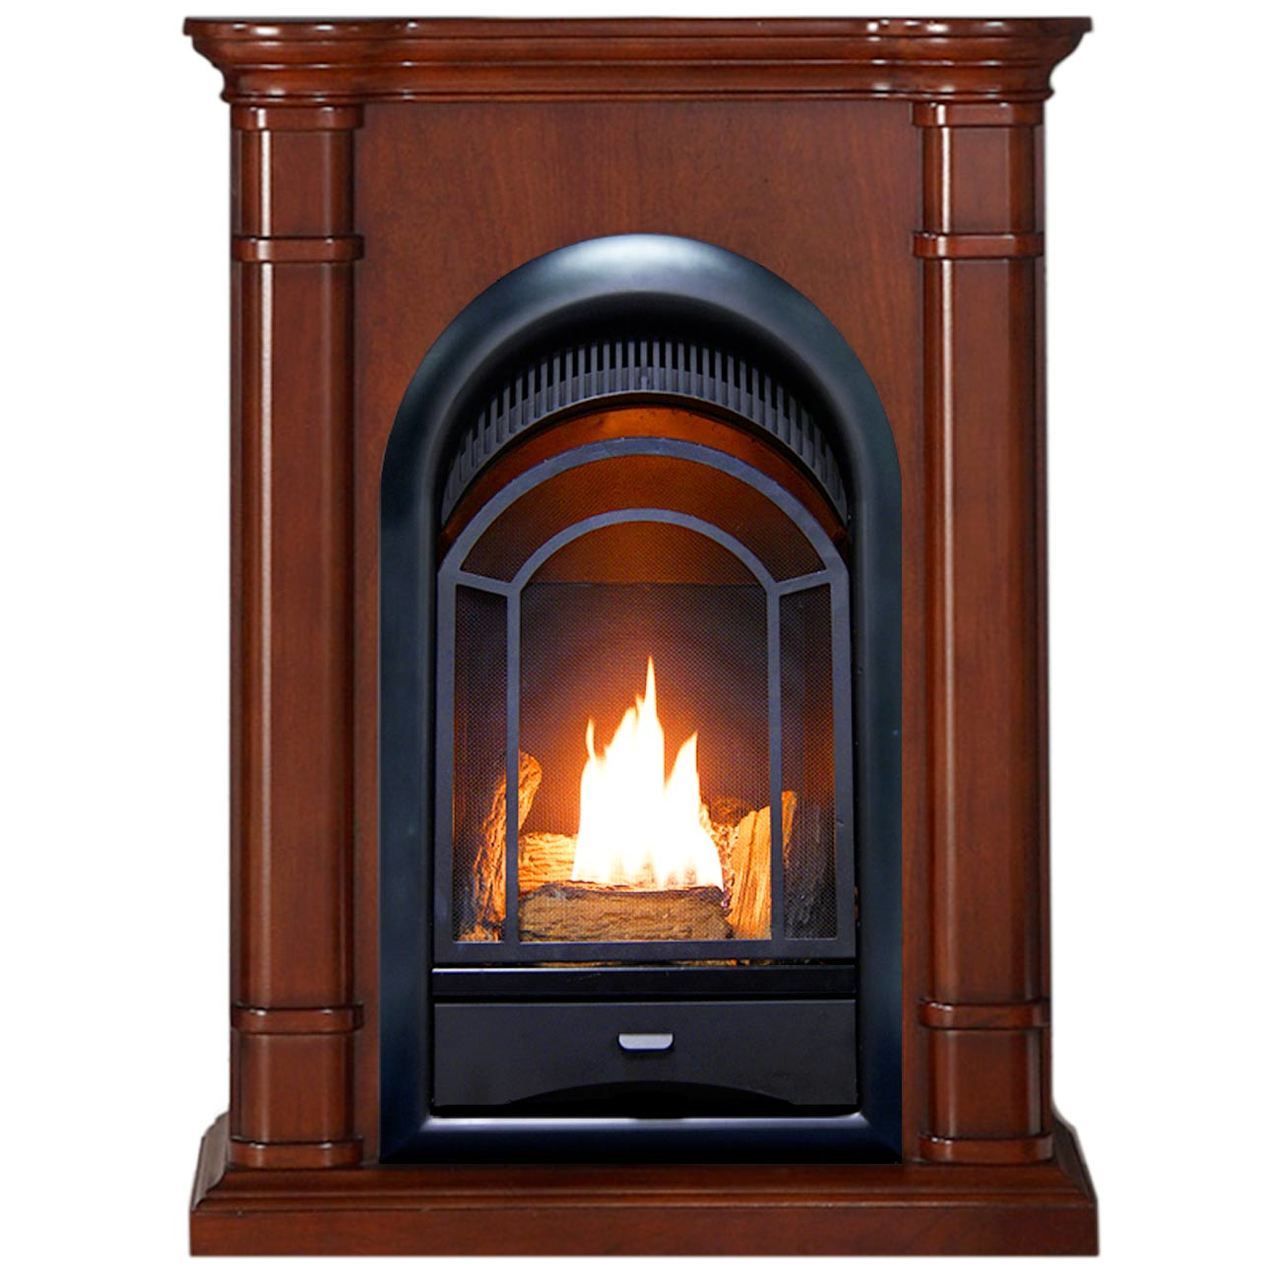 Vent Free Gas Fireplace Mantel Packages Elegant Pro Fs100t 3w Ventless Fireplace System 10k Btu Duel Fuel thermostat Insert and Walnut Mantel